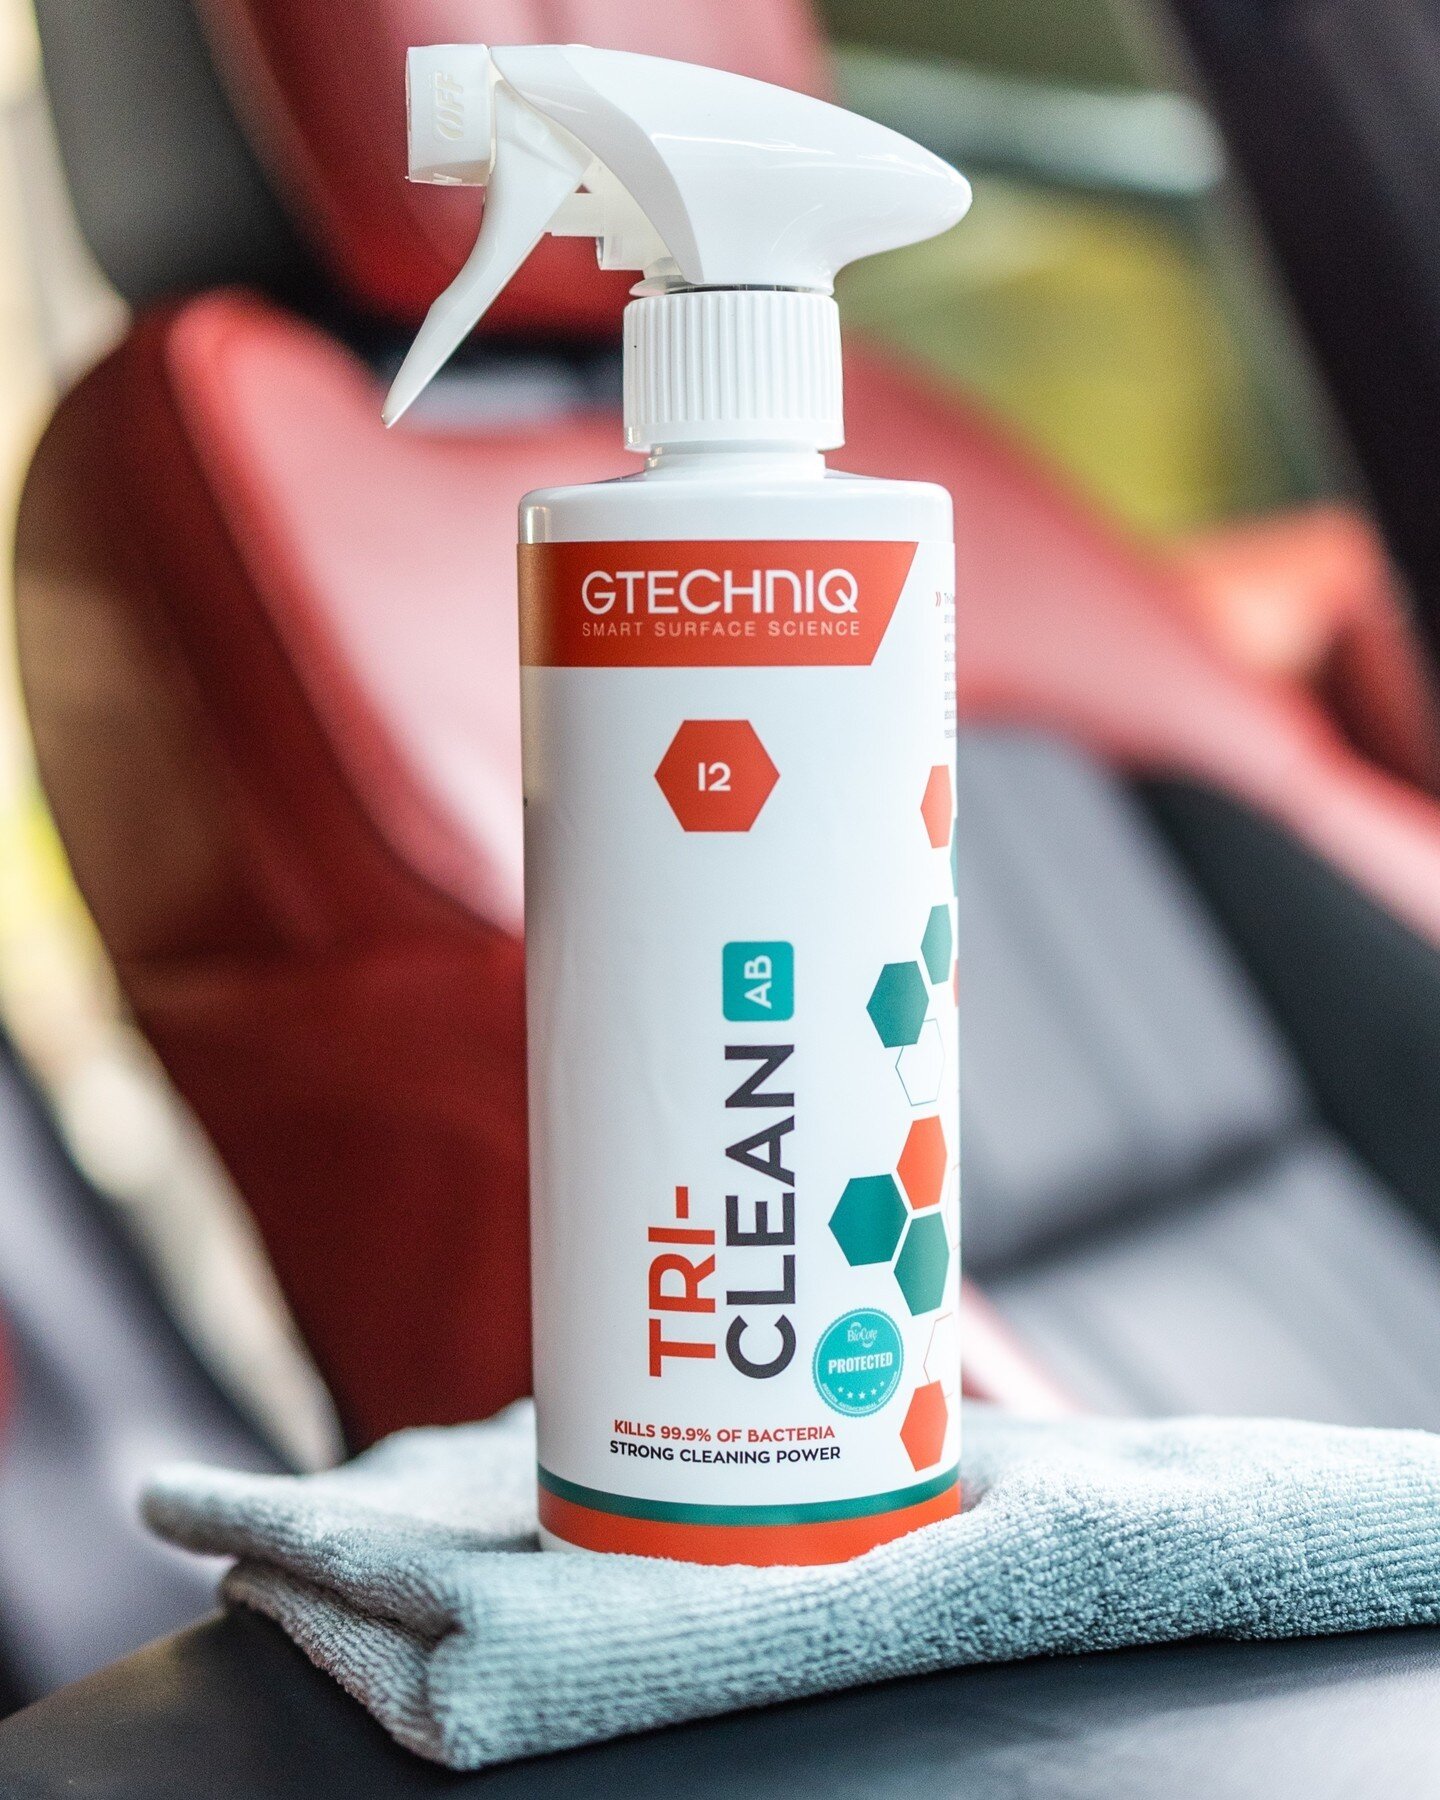 Not only do we use Gtechniq's Tri-Clean because it has a strong cleaning power, but also because it absorbs odors and kills 99.9% of bacteria. Here at The Detail Center, we only use the best products to clean and protect your car's interior. Call 616